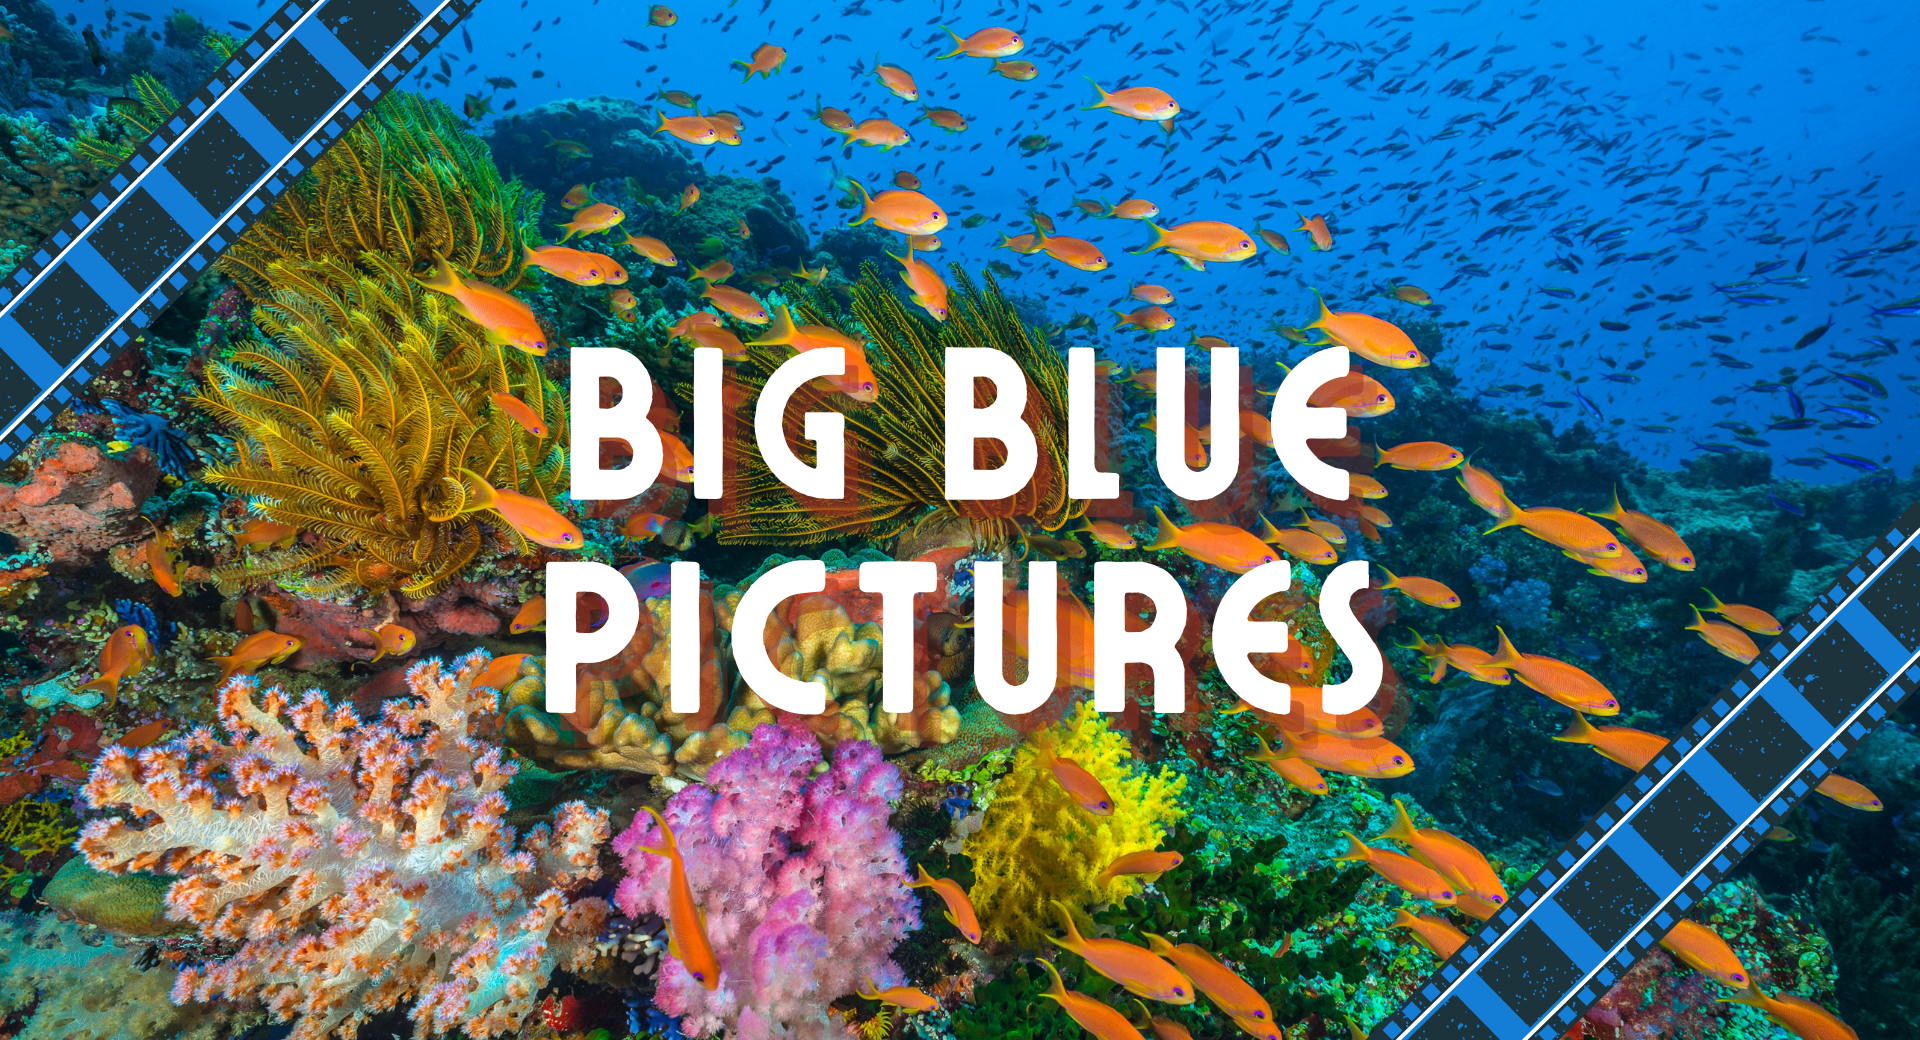 A photograph of a highly saturated coral reef with schools of fish swimming in the foreground and background. There is text in the middle that reads "Big blue pictures."